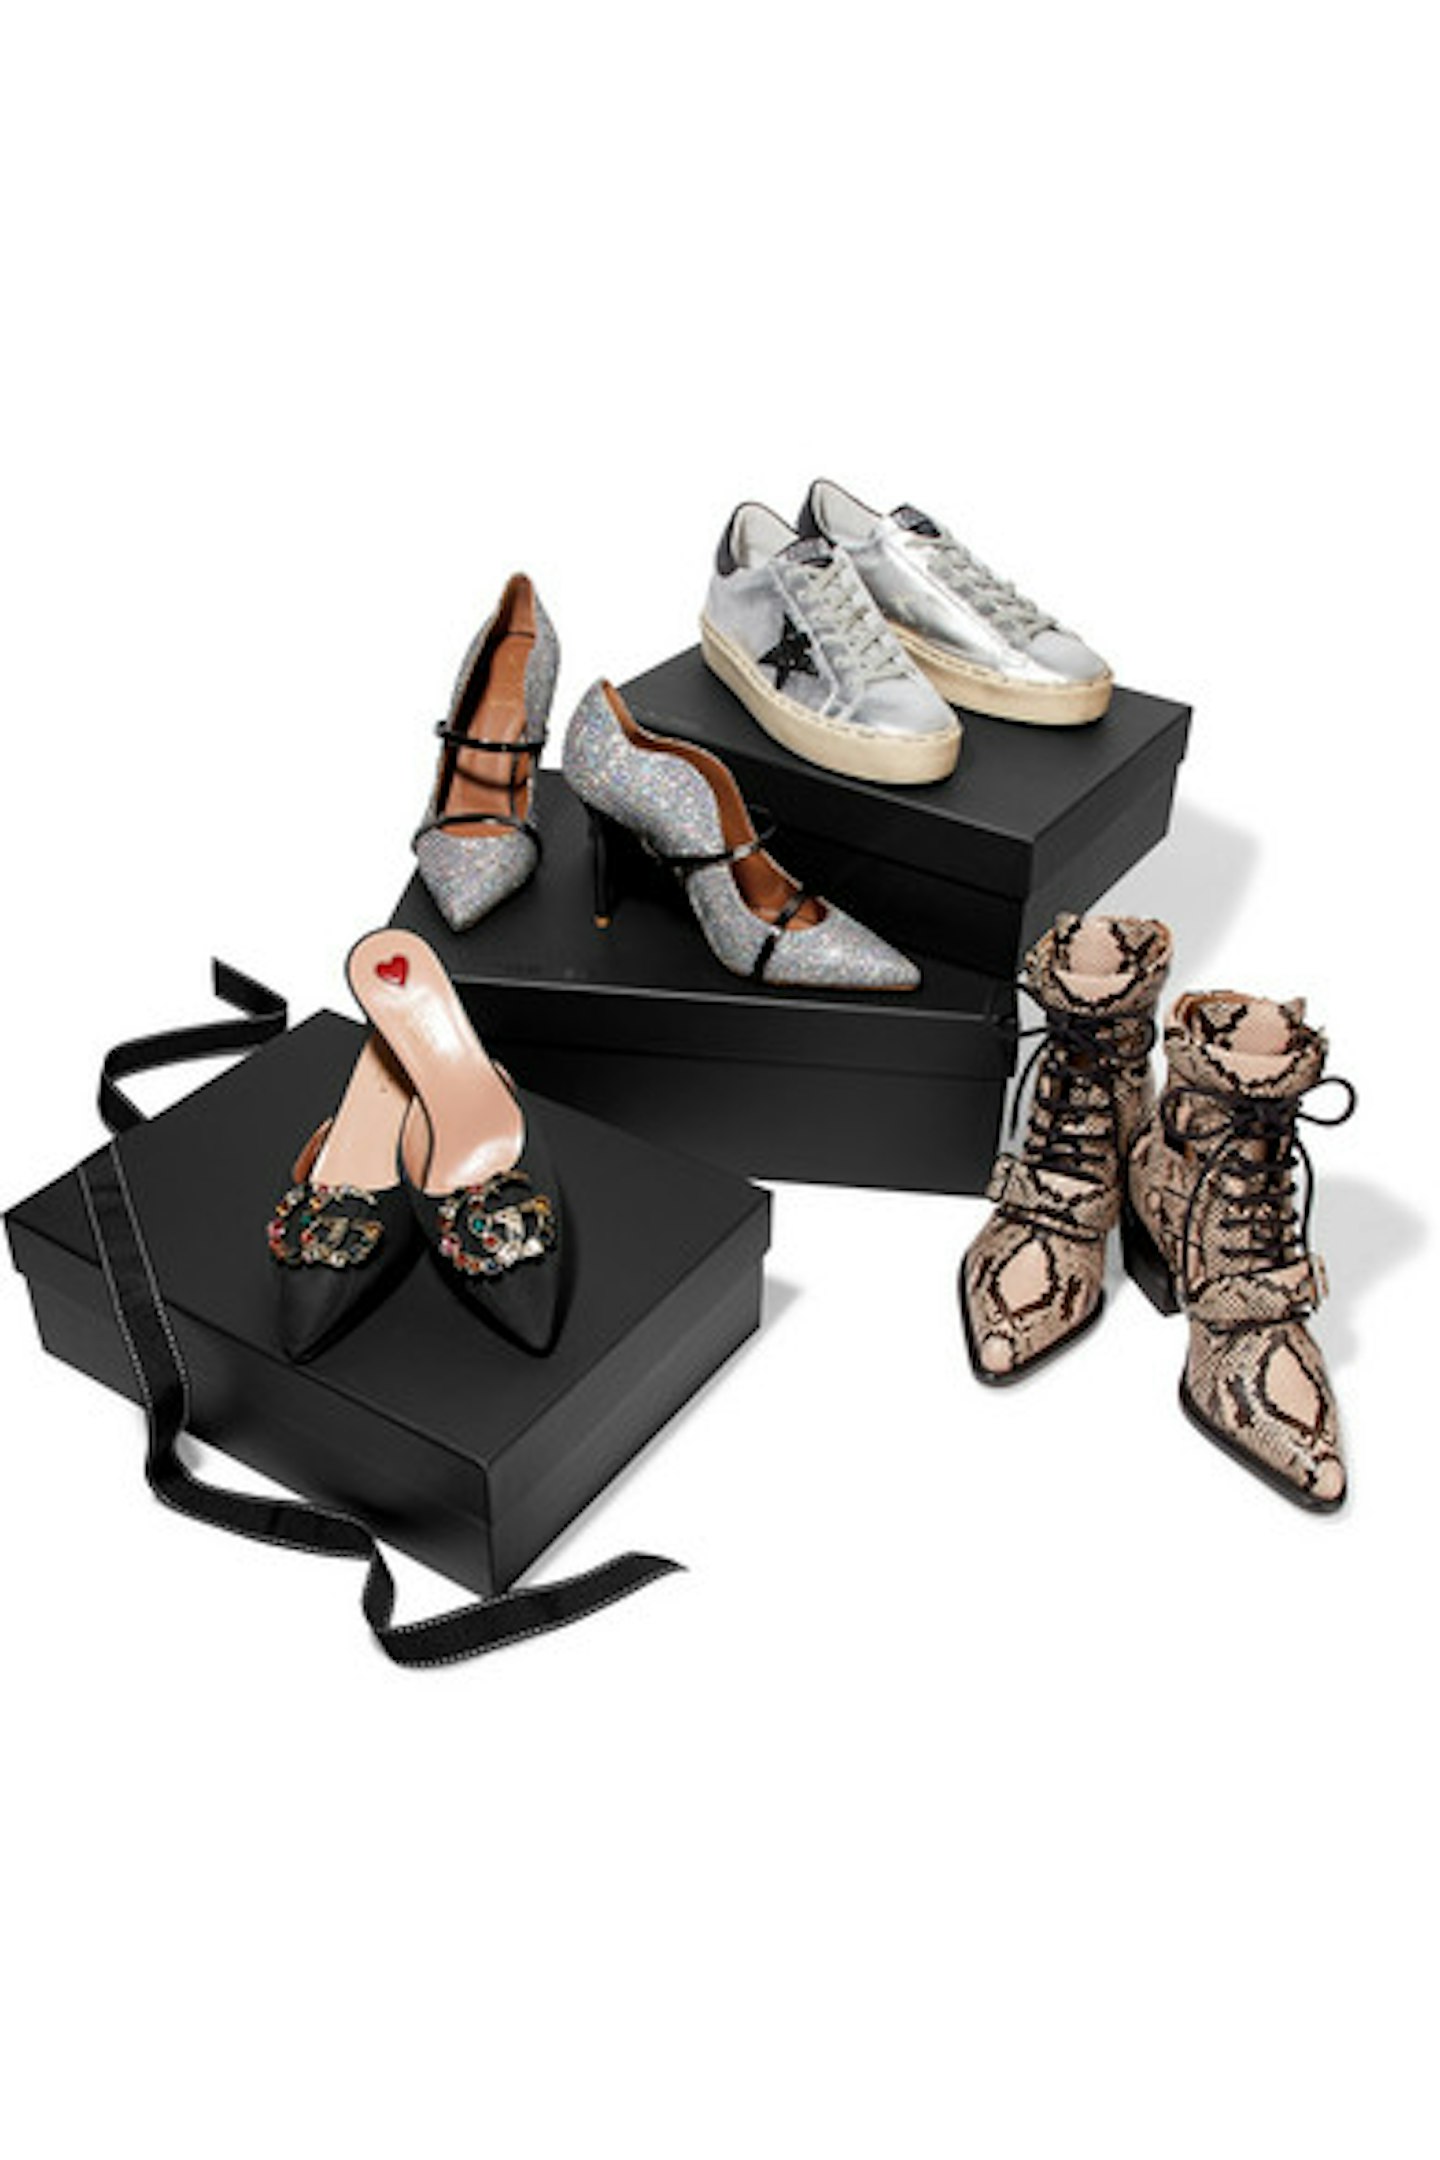 Net-A-Porter, The Shoe of the Month Subscription, £10000